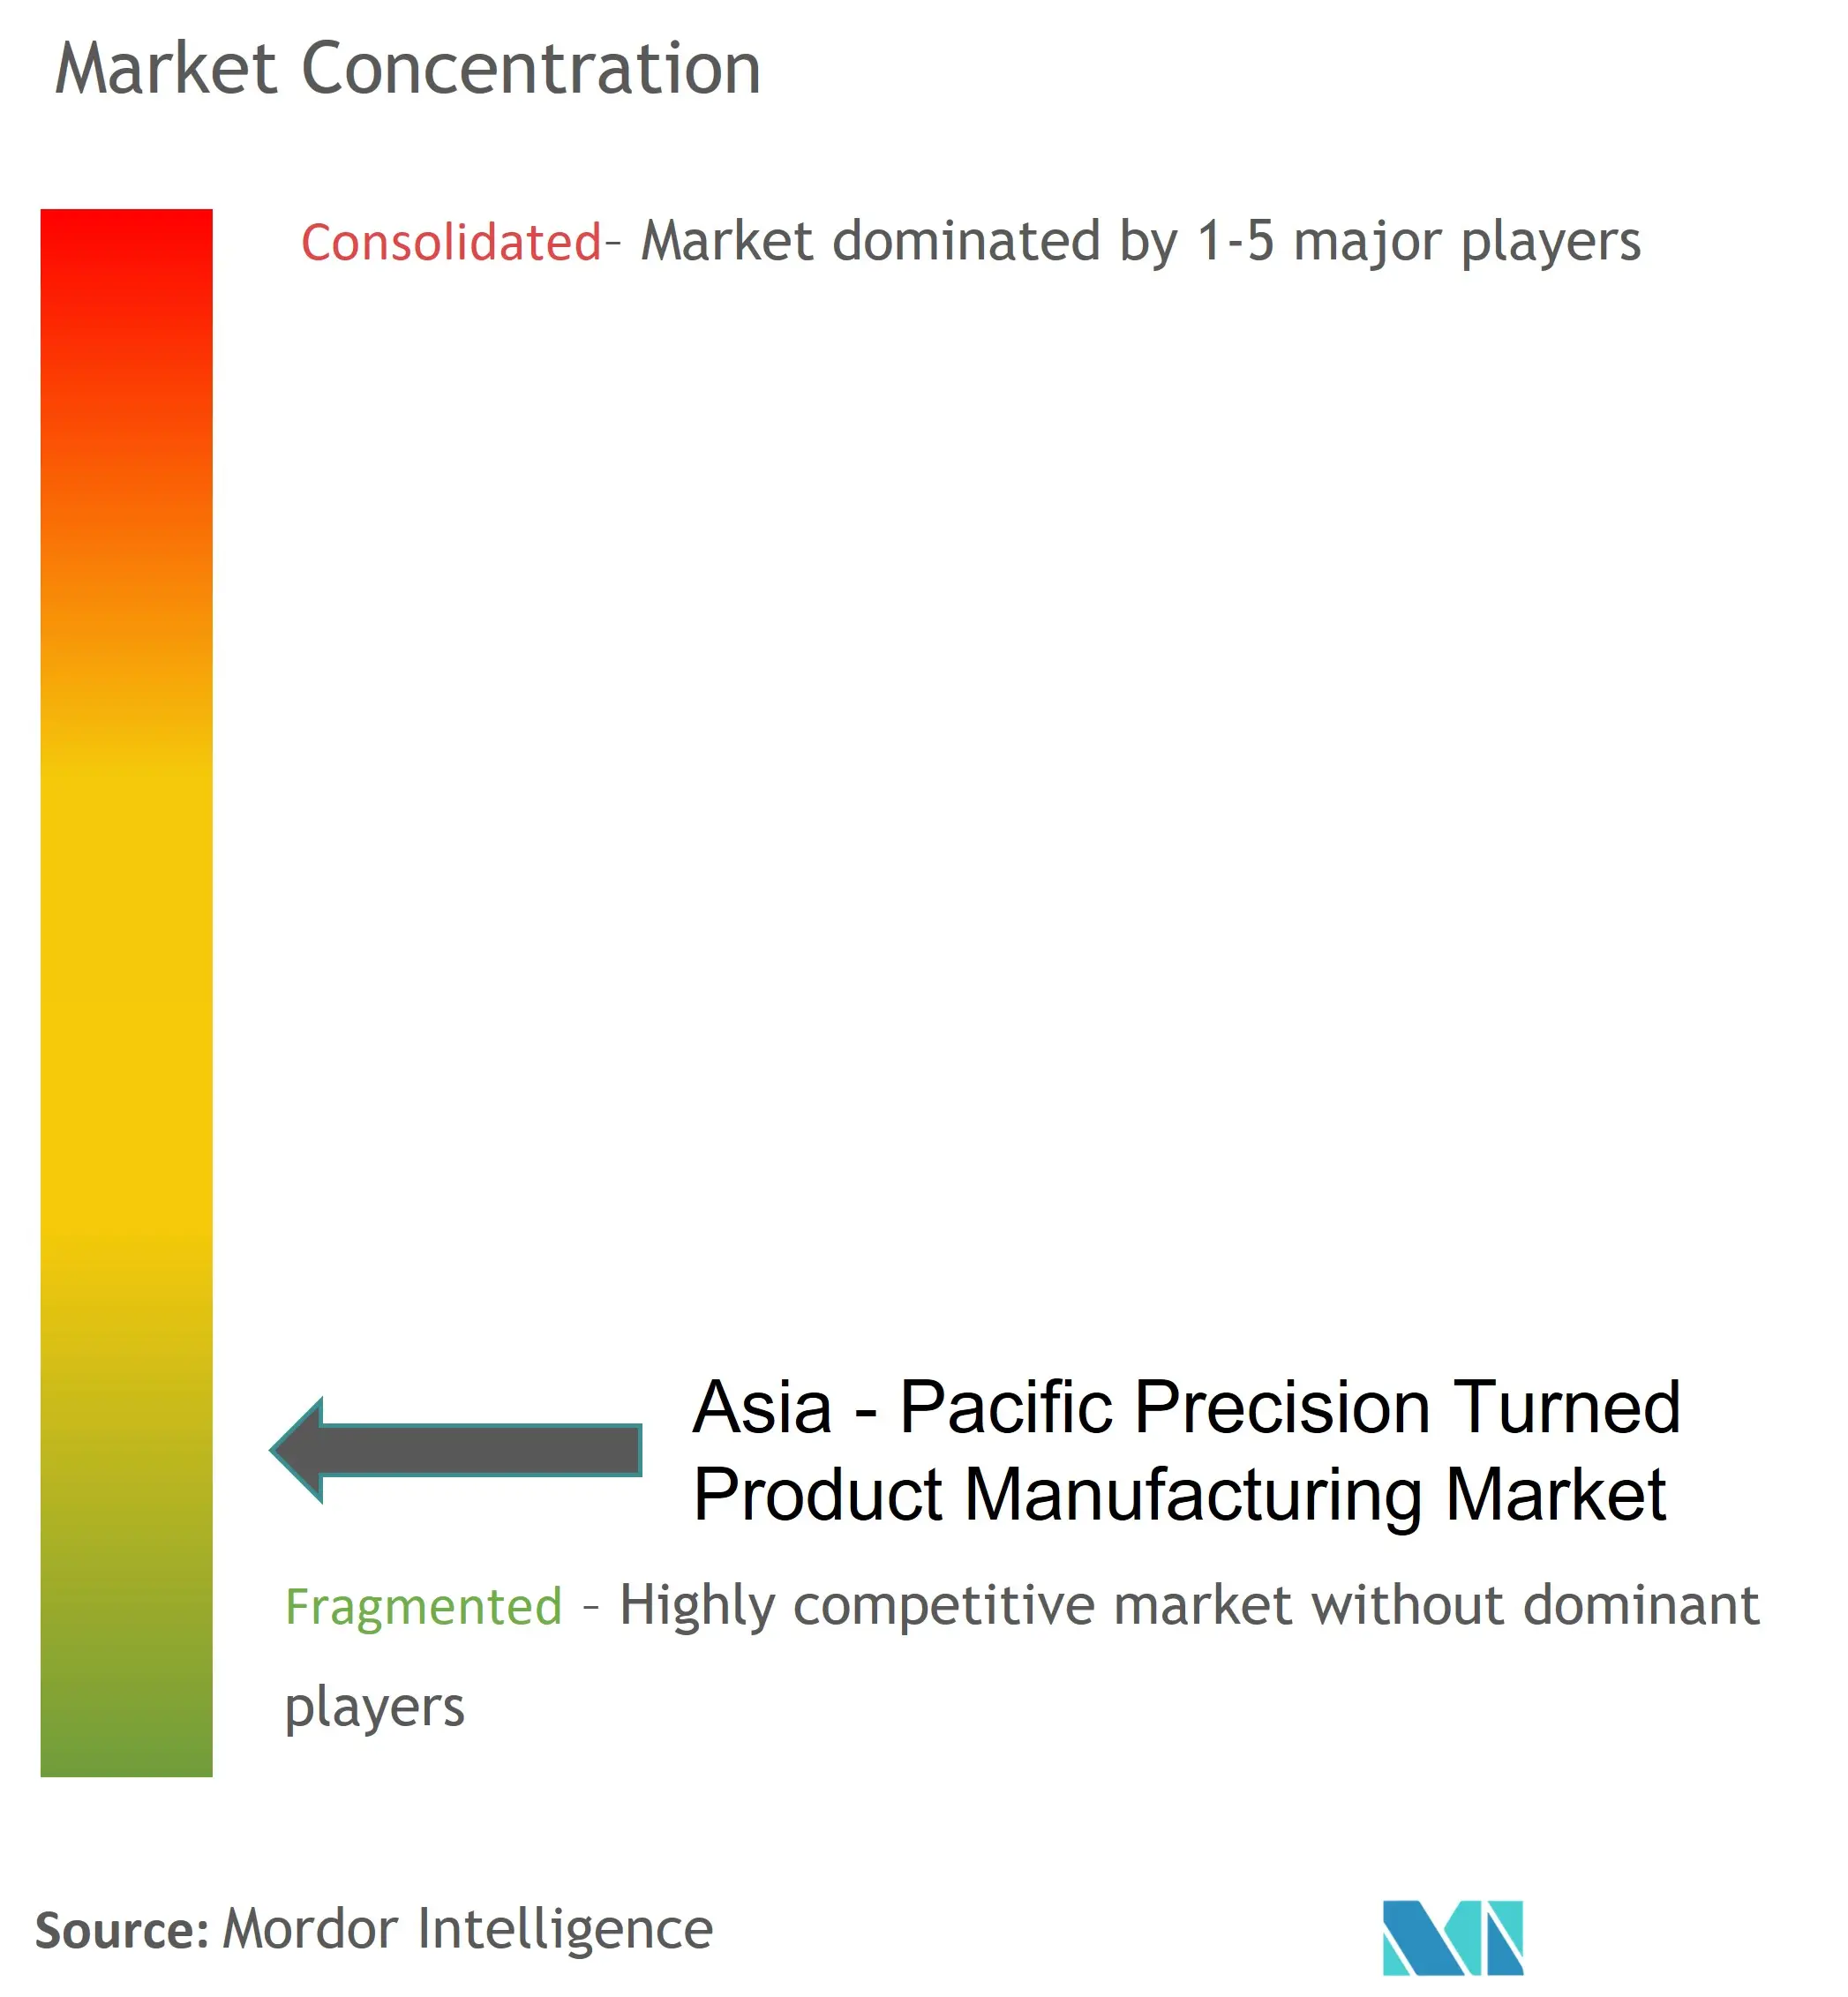 Asia-Pacific Precision Turned Product Manufacturing Market Concentration